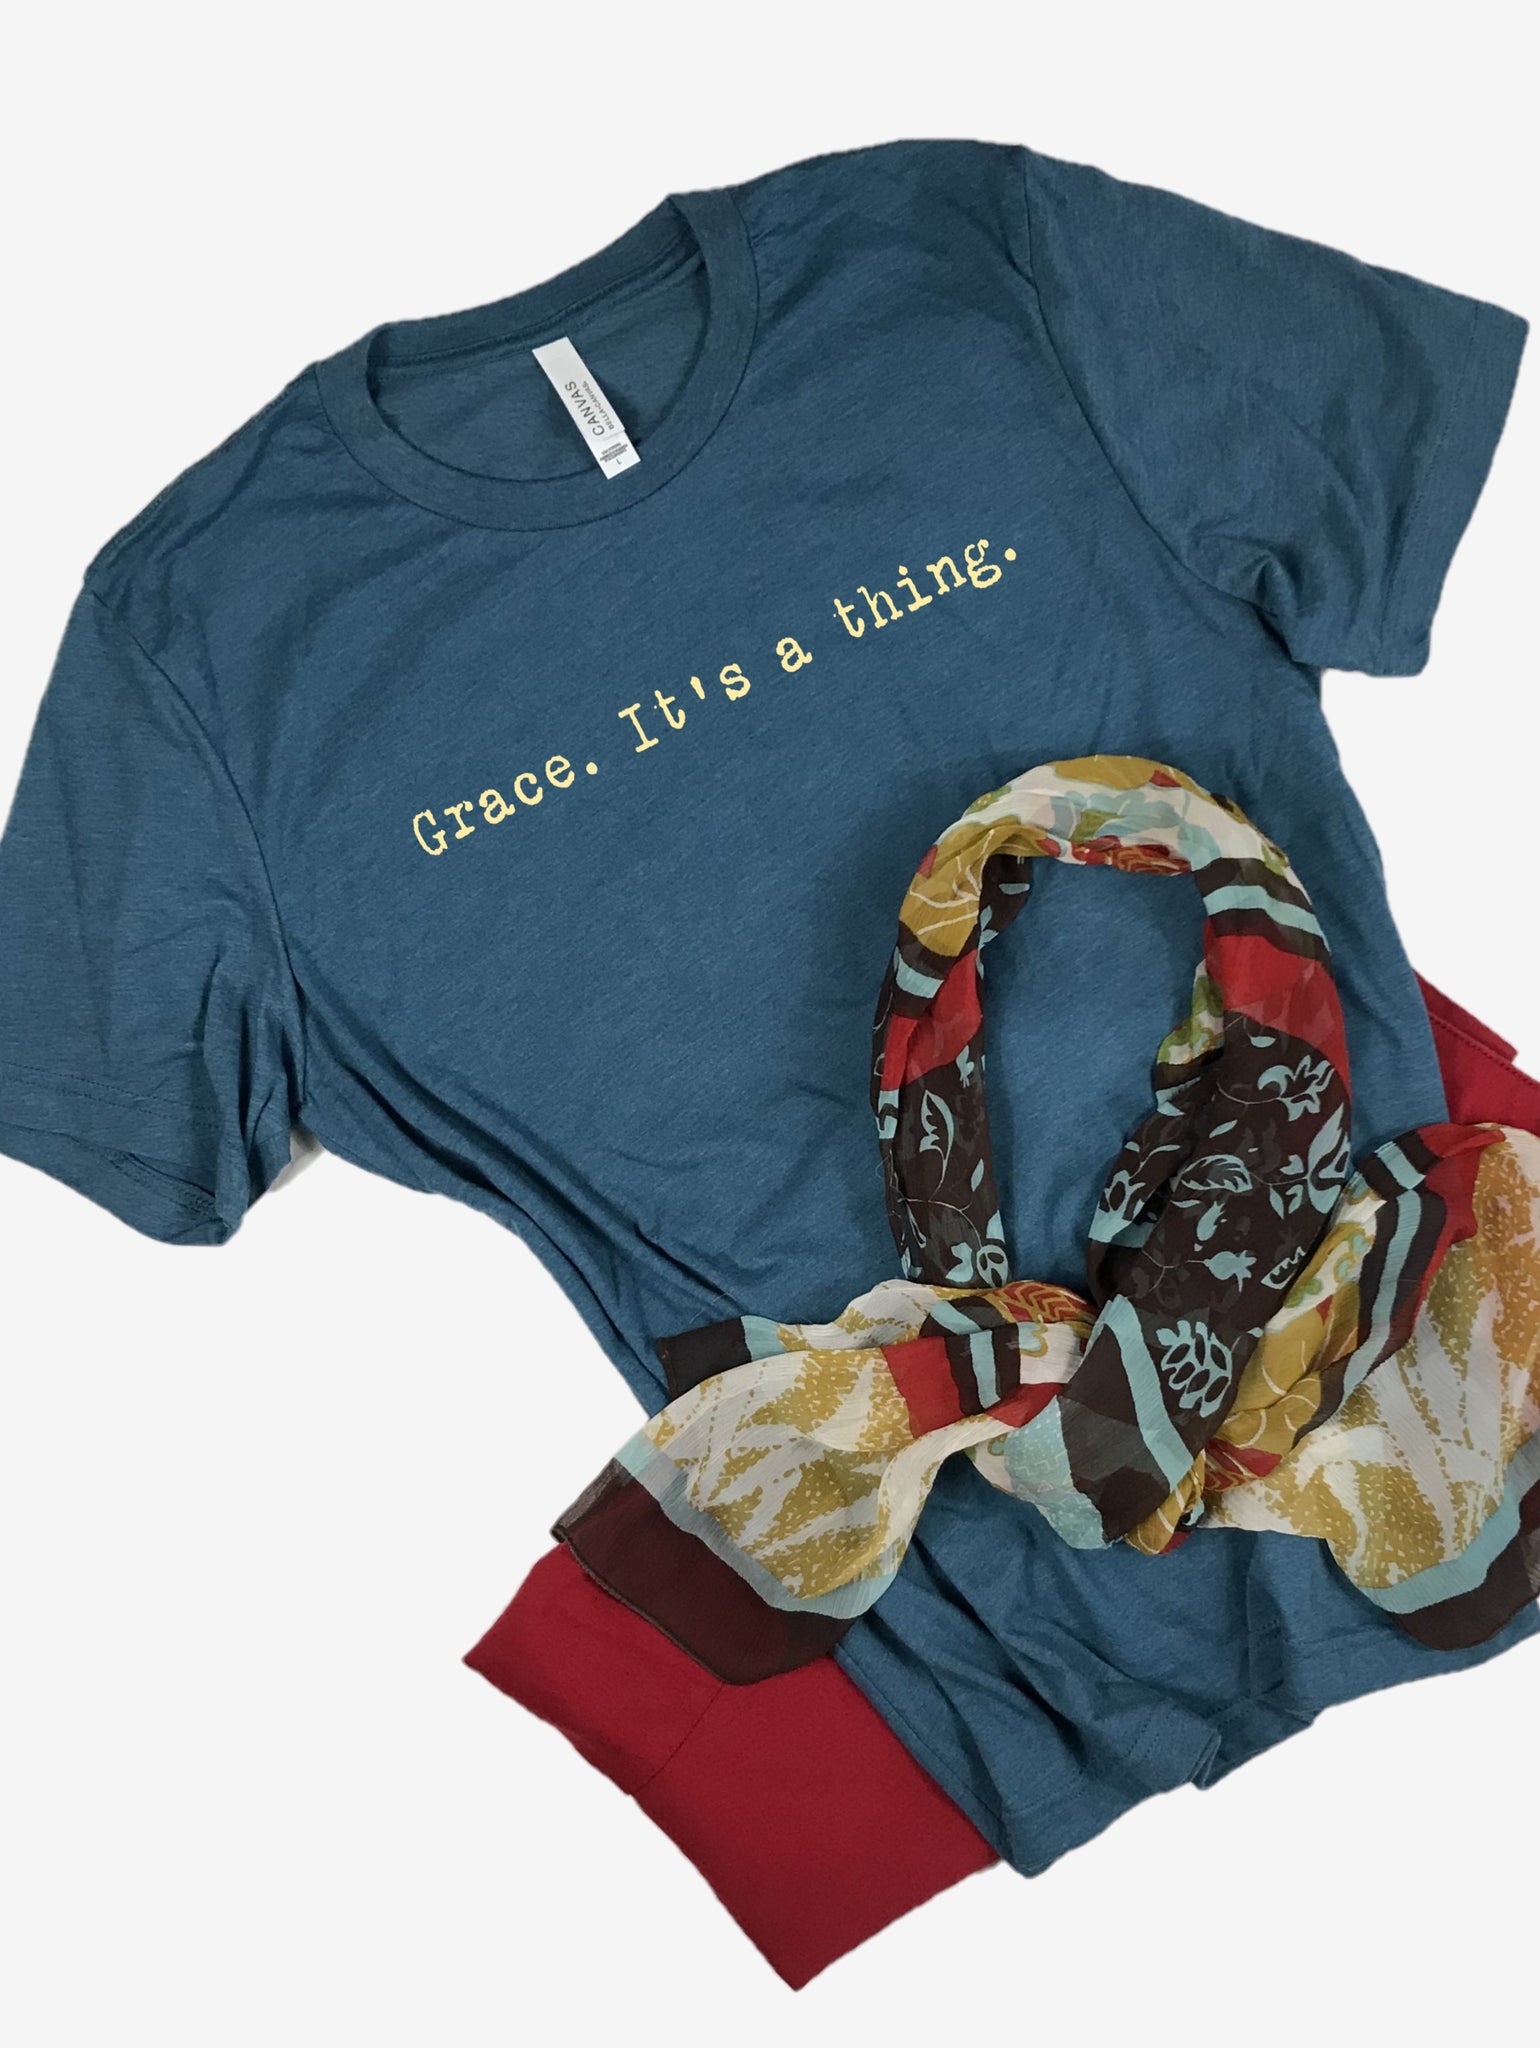 "Grace. It's a thing." Short Sleeve Tee Shirt, Crew Neck, Heather Teal